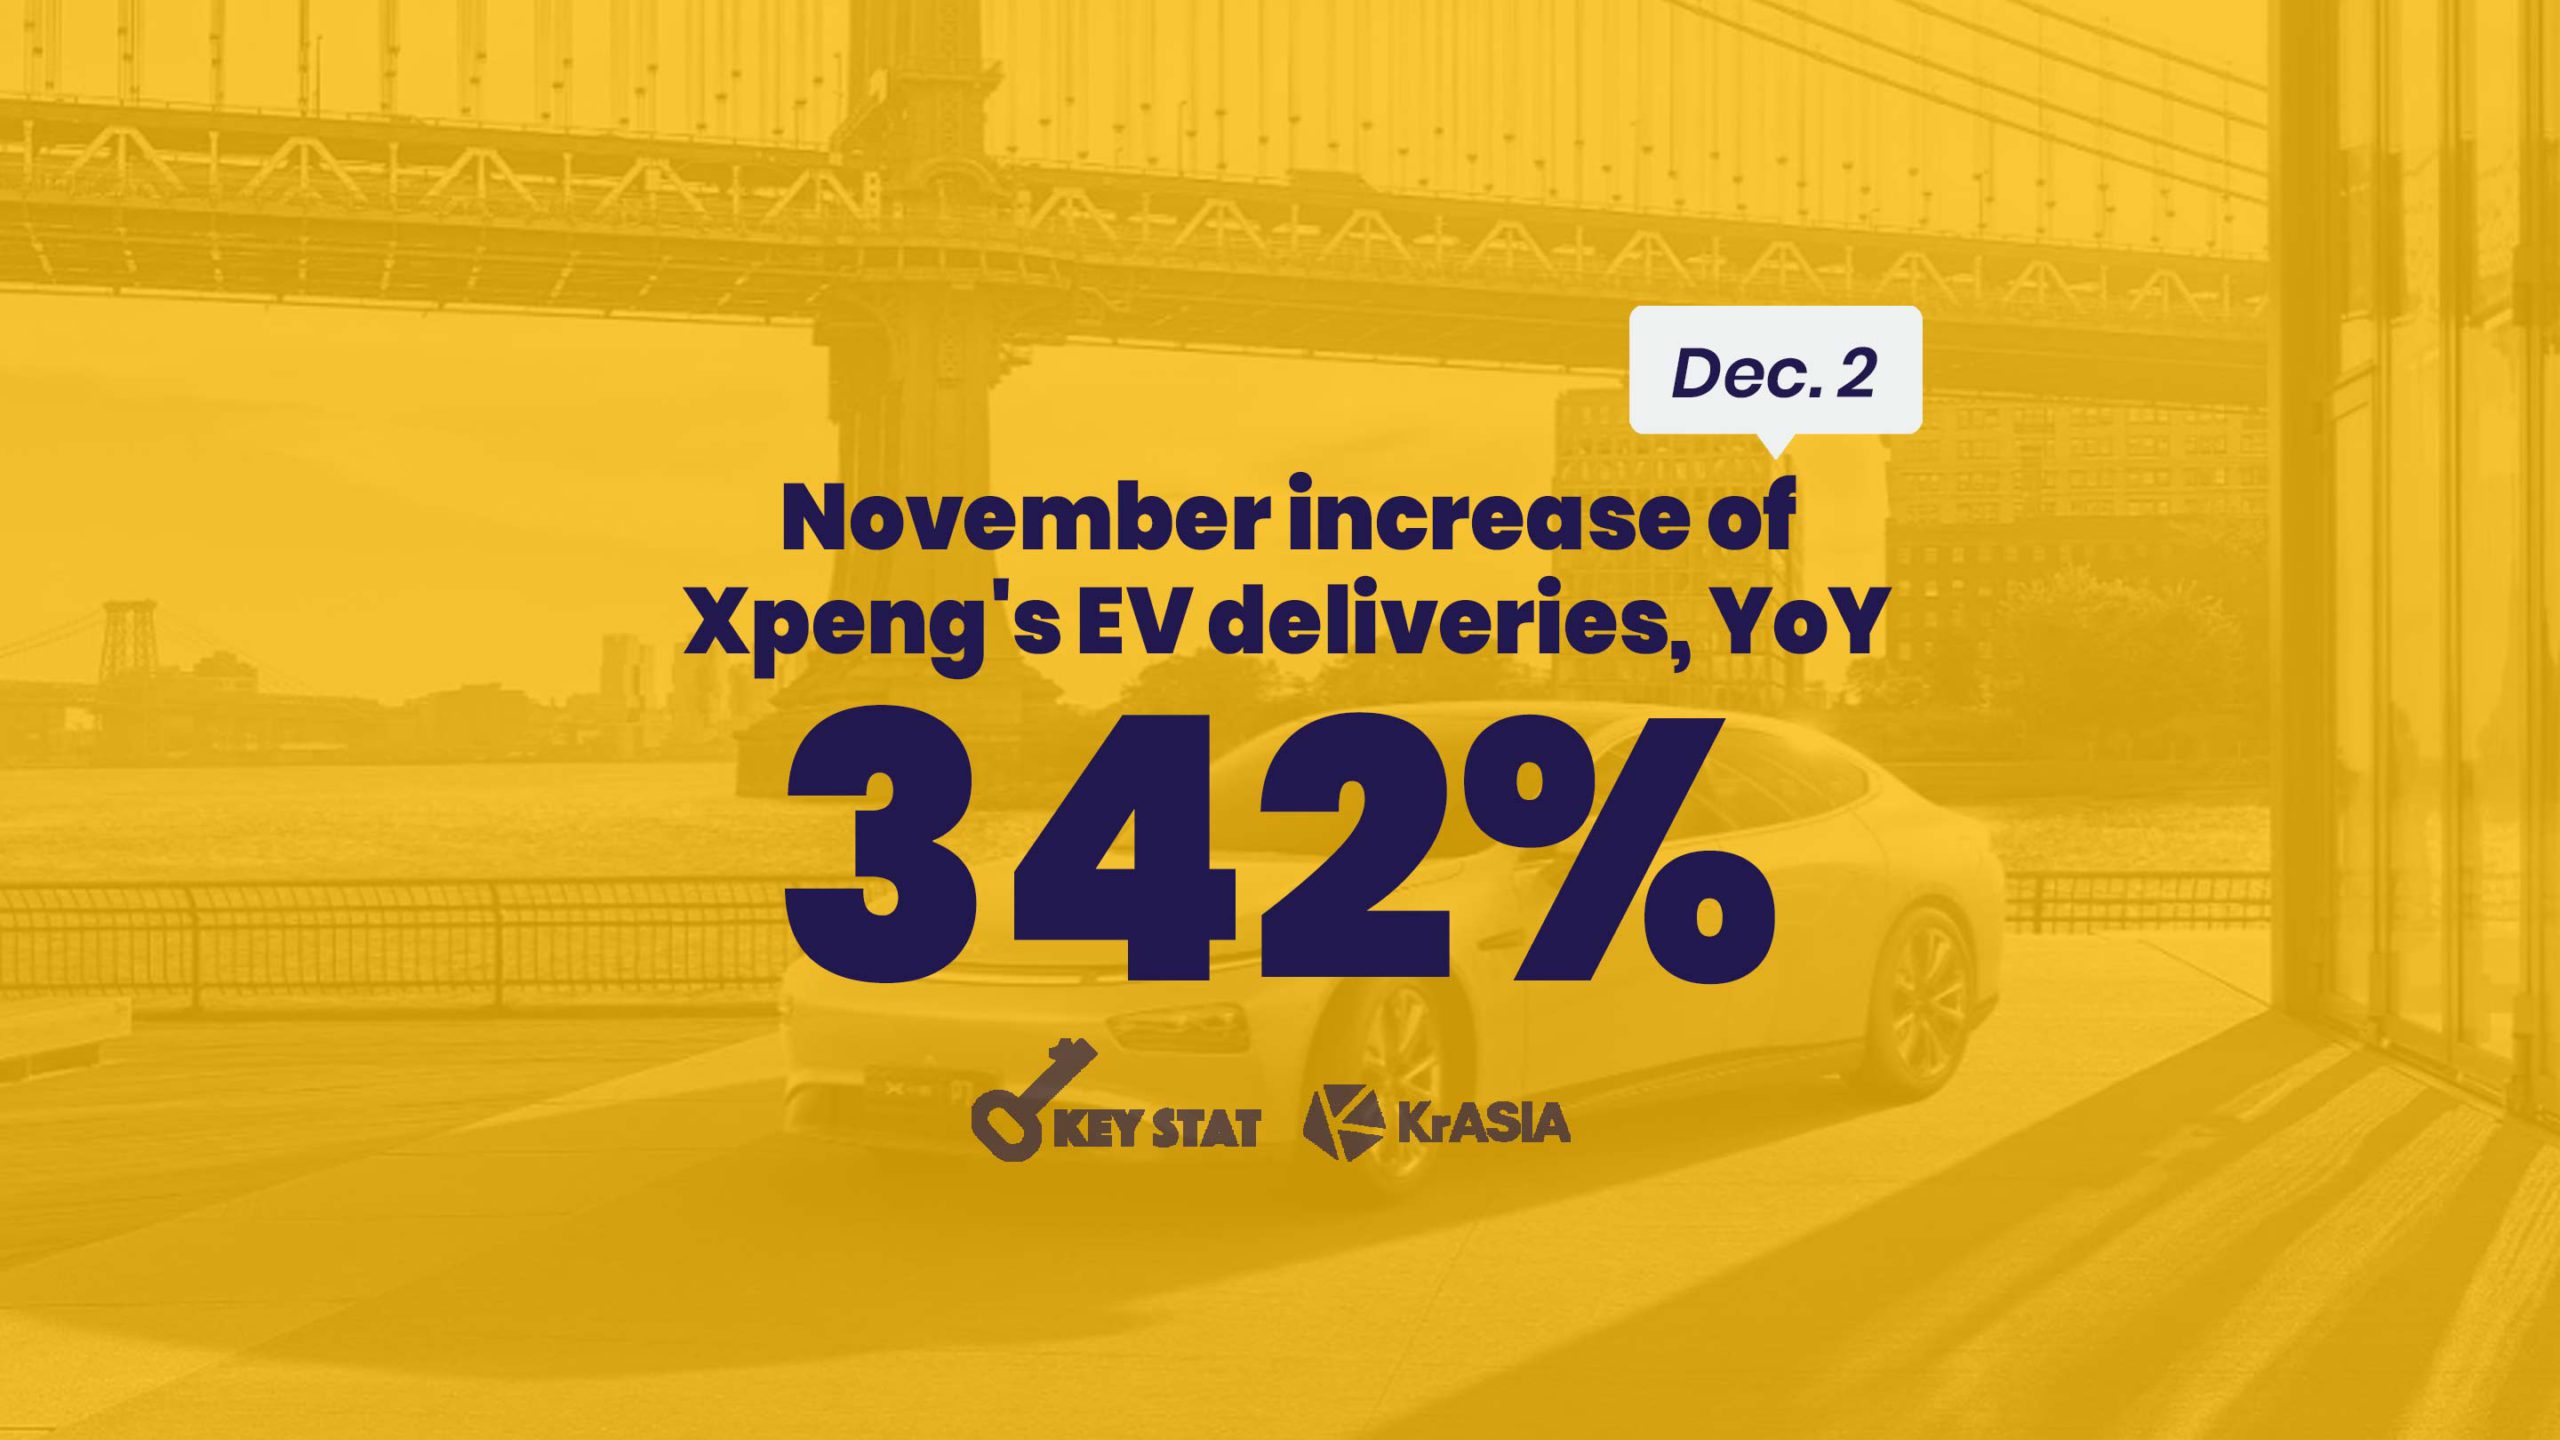 KEY STAT | Xpeng deliveries up 342% in November as China’s EV industry gains steam